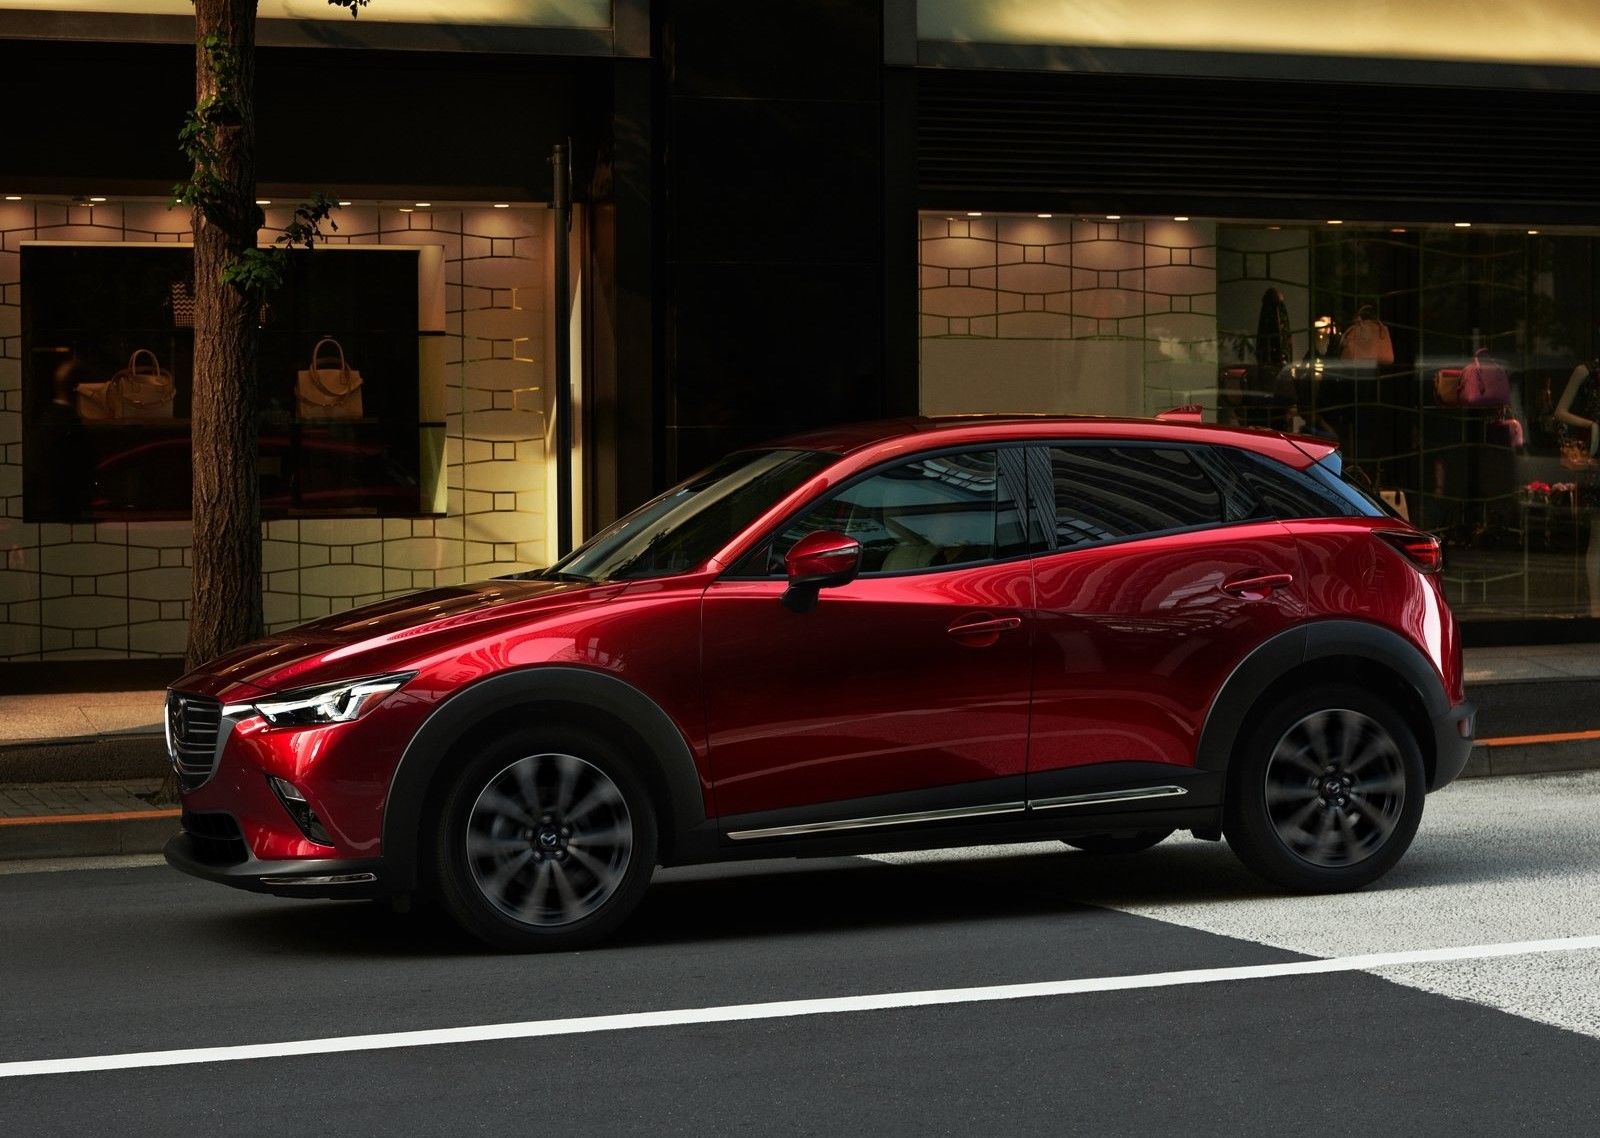 The 2019 Mazda CX-3 Unveiled in New York